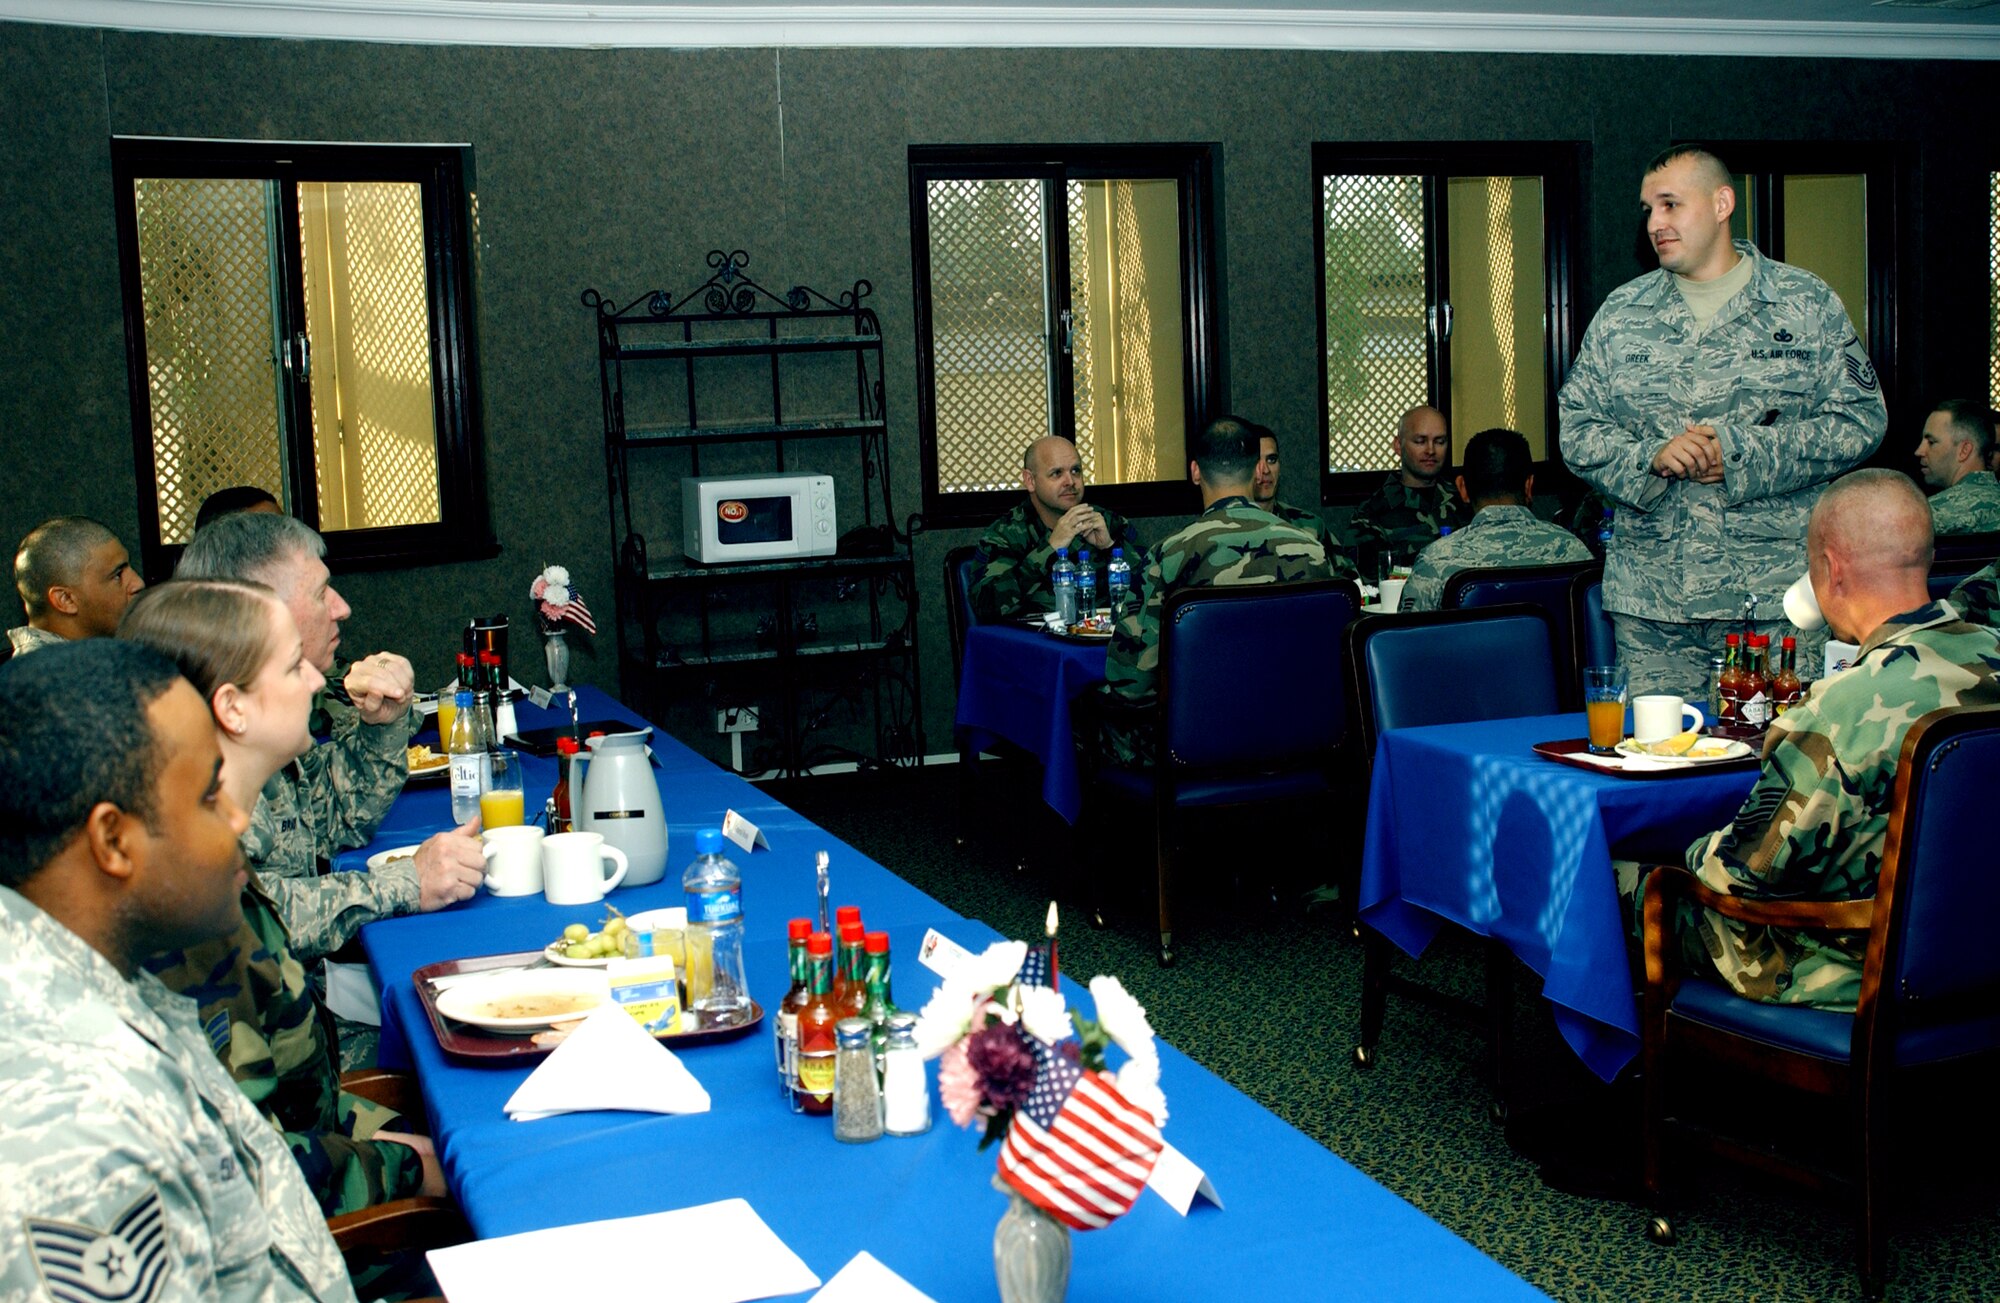 Master Sgt. Christopher Greek, 39th Security Forces Squadron, poses a question to Gen. Roger Brady, United States Air Forces in Europe commander, during a breakfast at the Sultan's Inn dining facility April 29. General Brady attended the breakfast with many Airmen from around the base during his visit to Incirlik April 28-29. (U.S. Air Force photo by Senior Airman Heather Stanton)